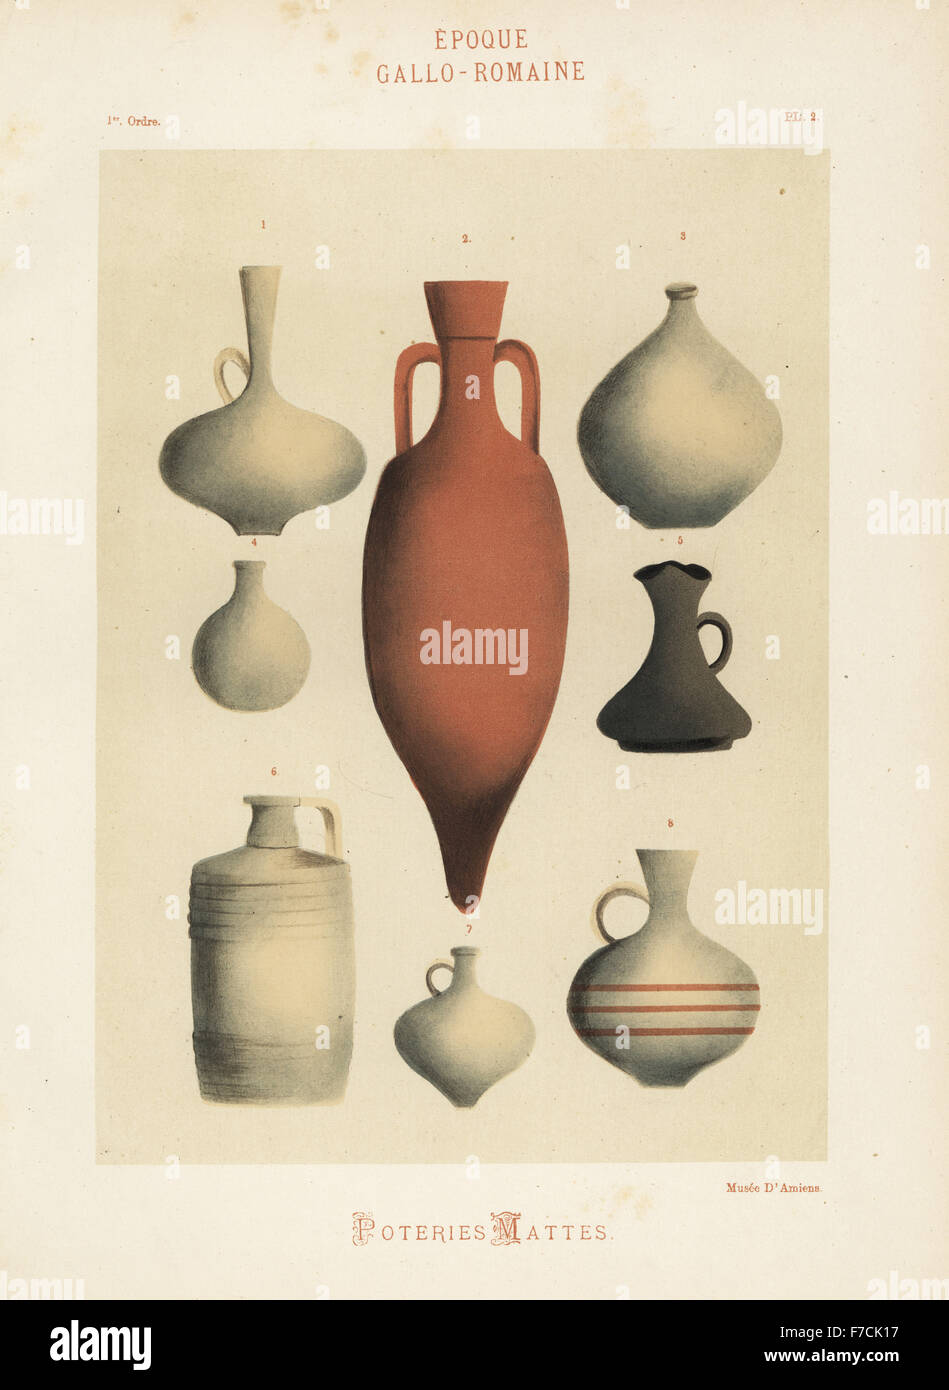 Greco-roman clay amphora, vases, jugs and urns. Hand-finished chromolithograph from Ris Paquot's General History of Ancient French and Foreign Glazed Pottery, Chez l'Auteur, Paris, 1874. Stock Photo